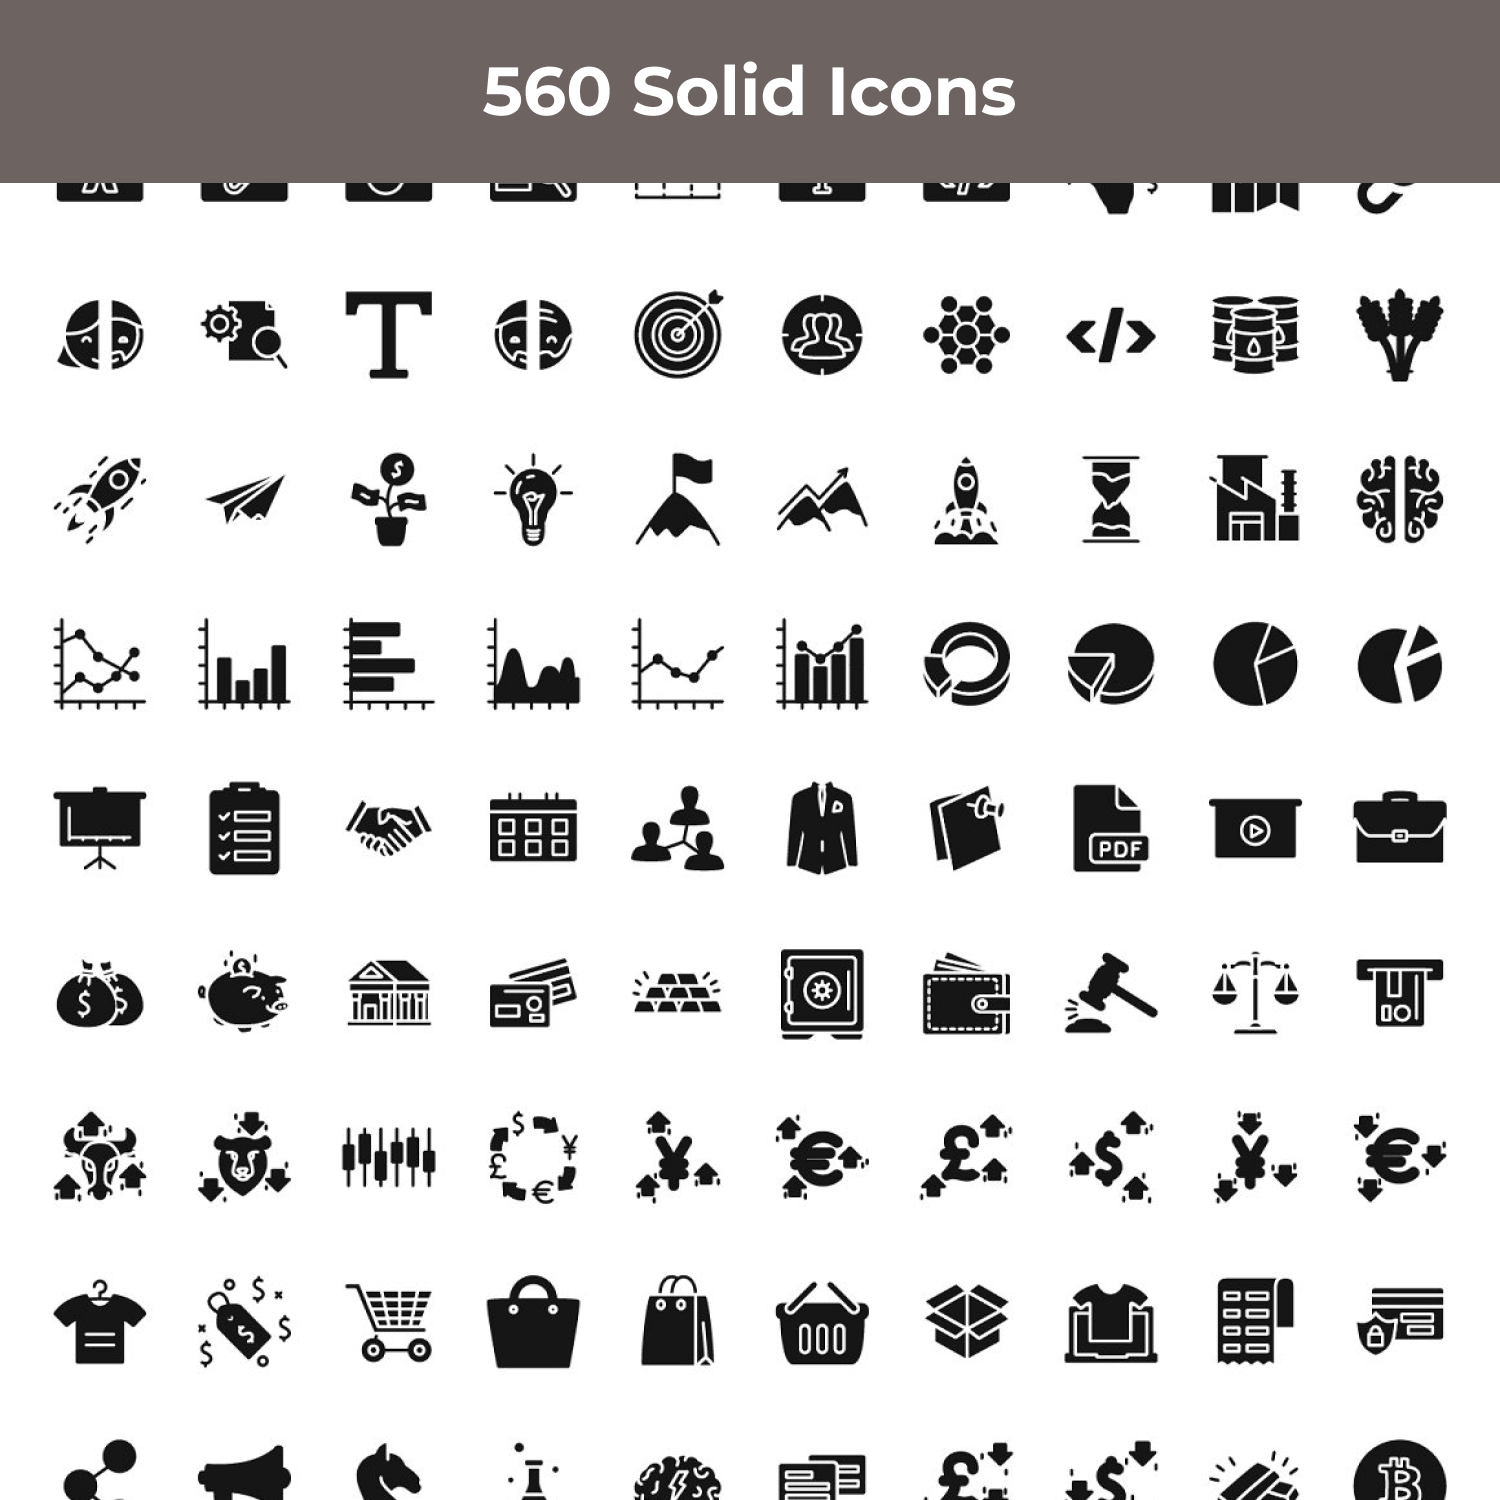 560 black solid icons.